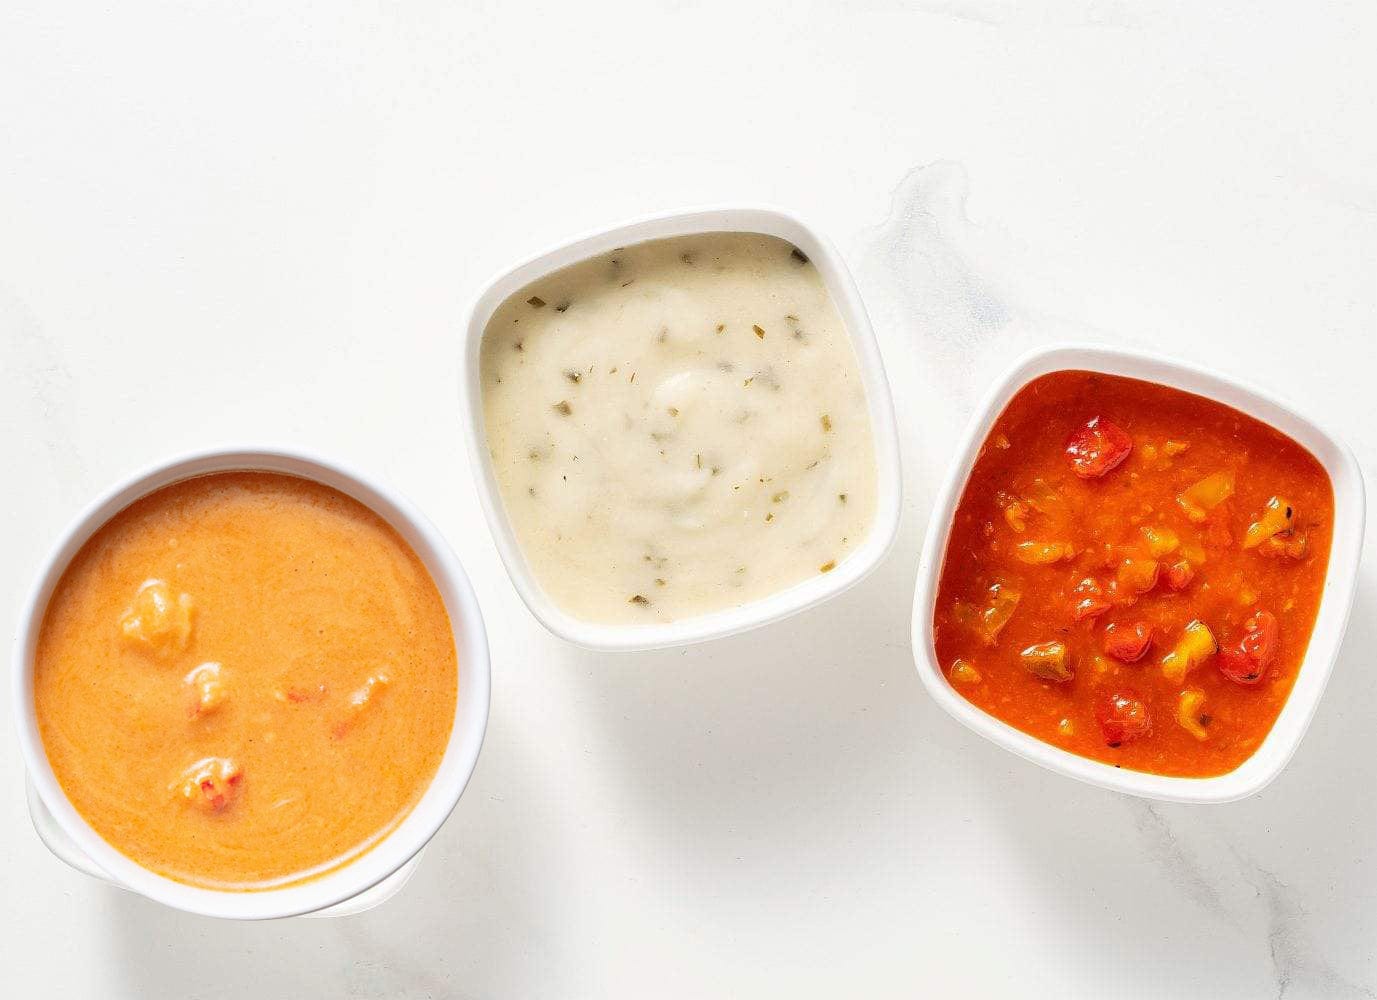 Cuisine Solutions Sauce Collection 2022 | Lemon Herb, Fire Roasted Pepper, & Lobster Sauce